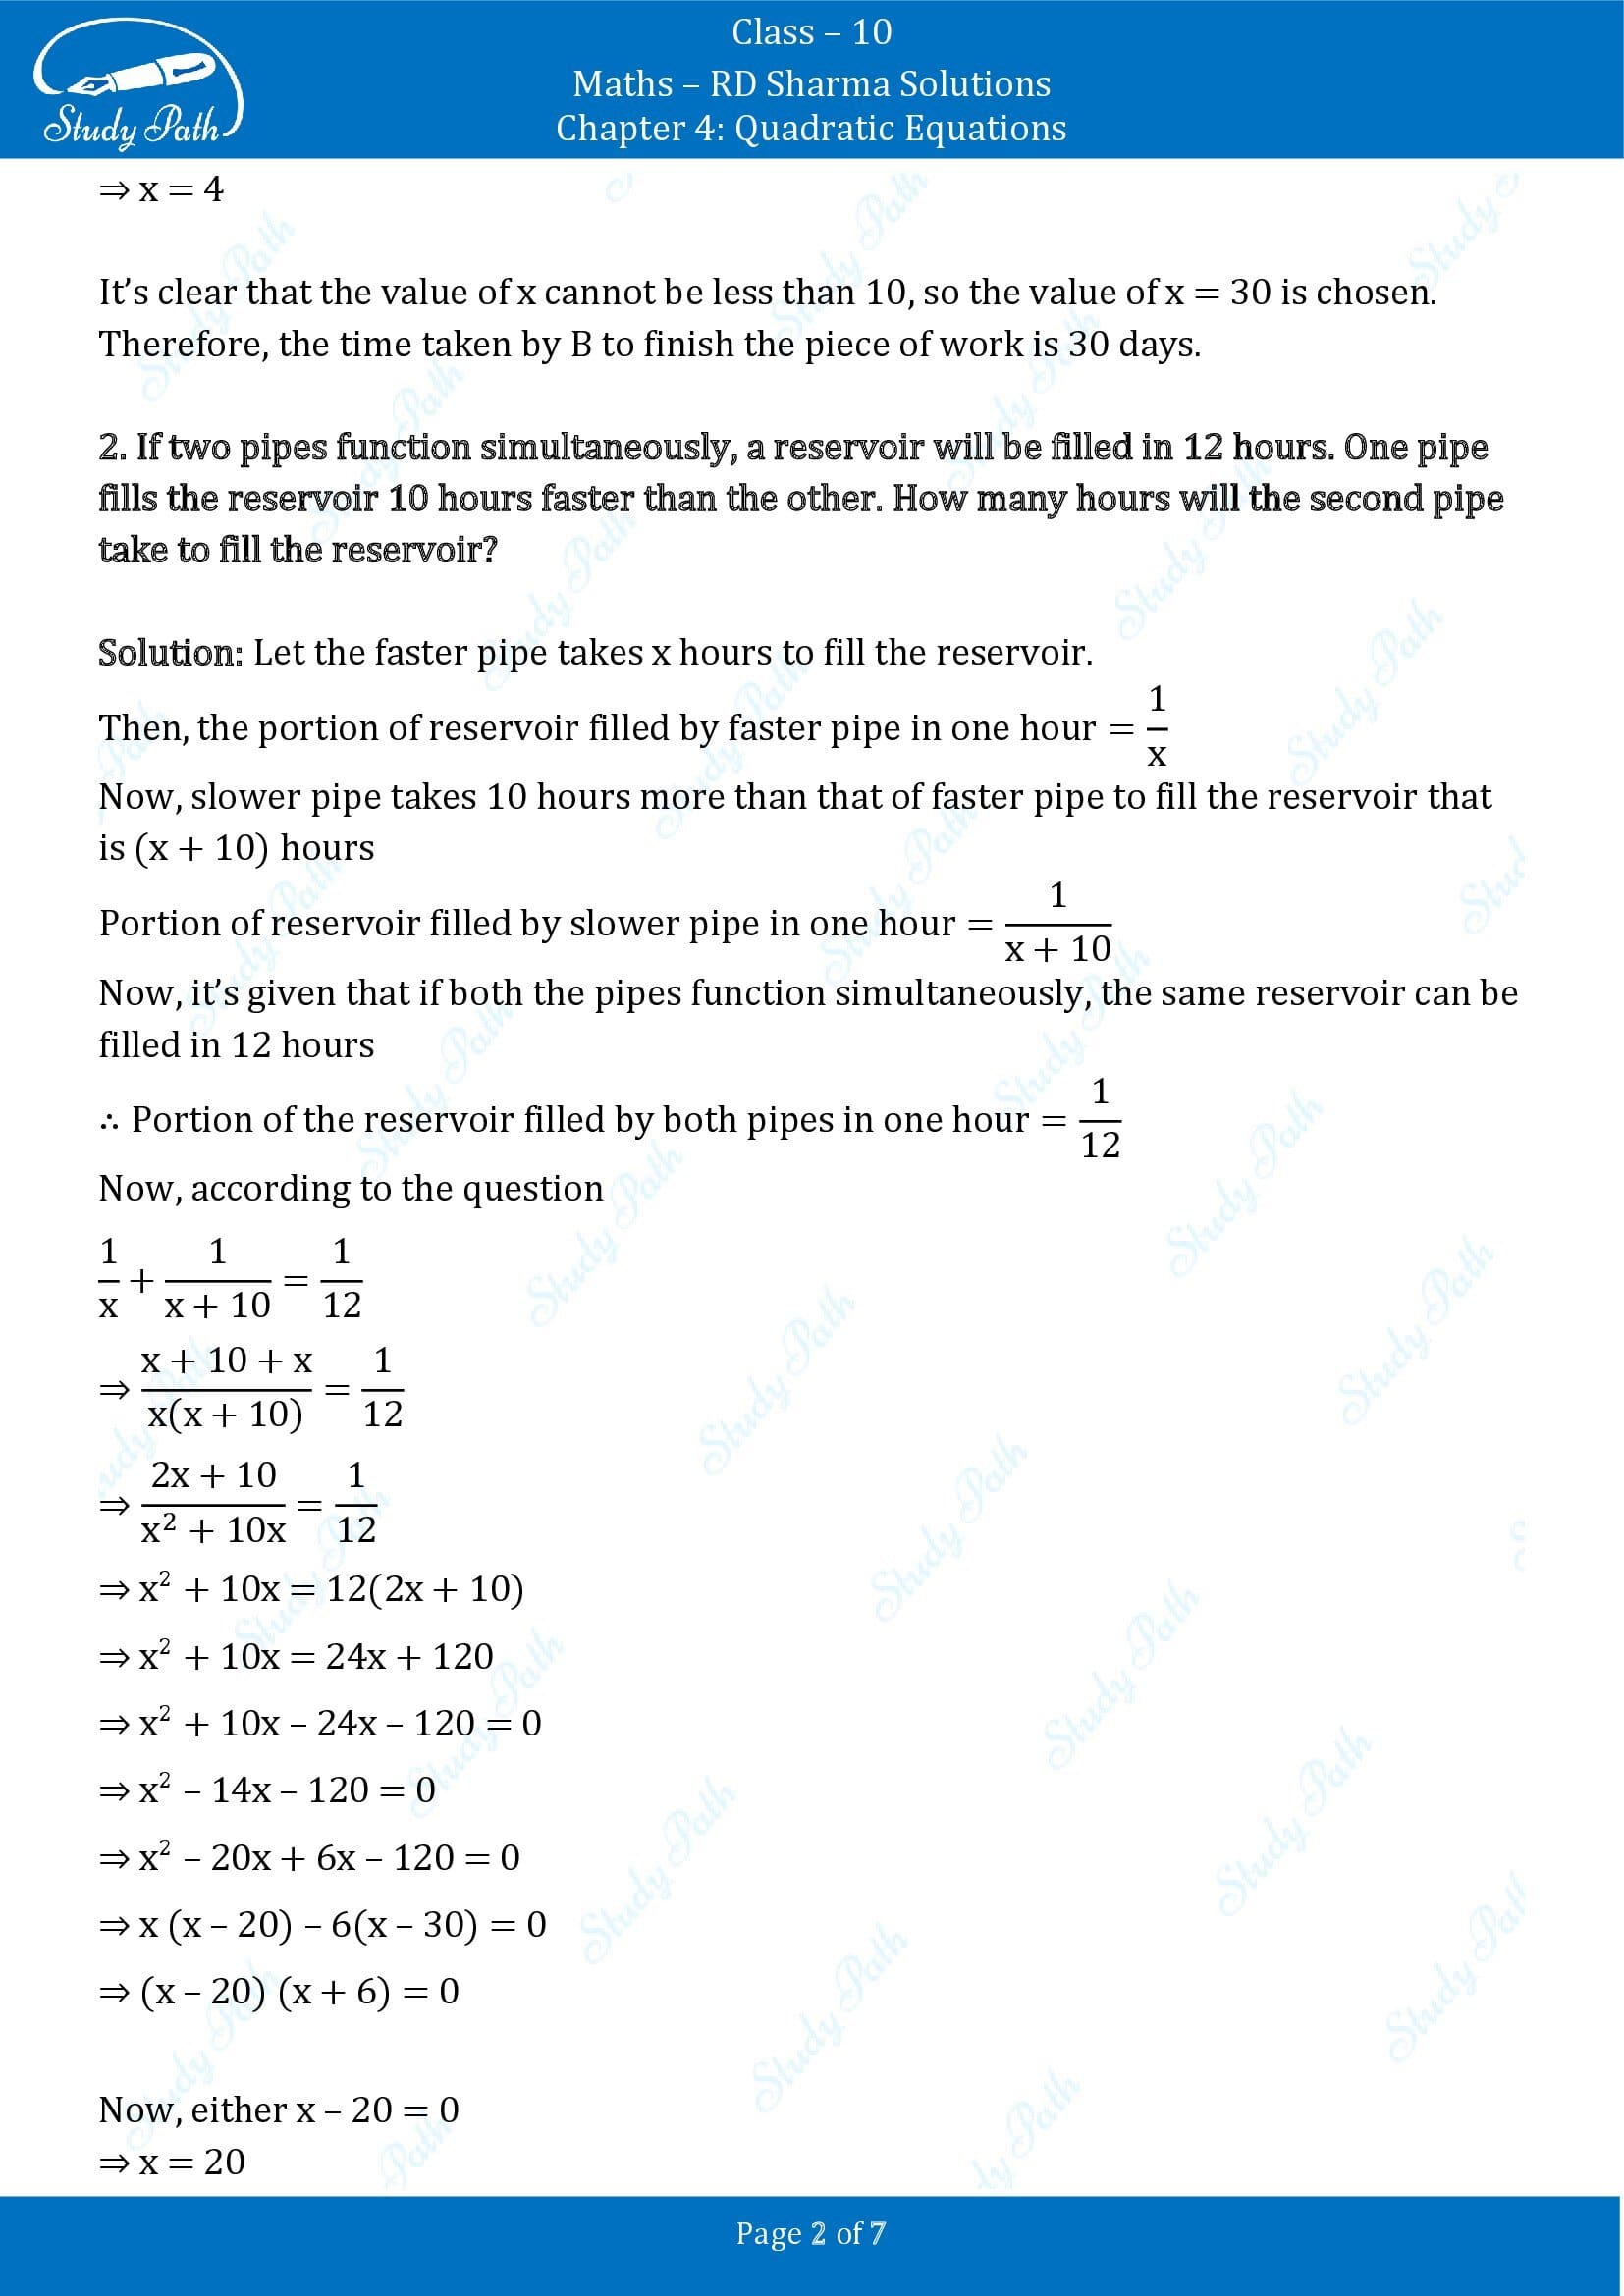 RD Sharma Solutions Class 10 Chapter 4 Quadratic Equations Exercise 4.12 00002